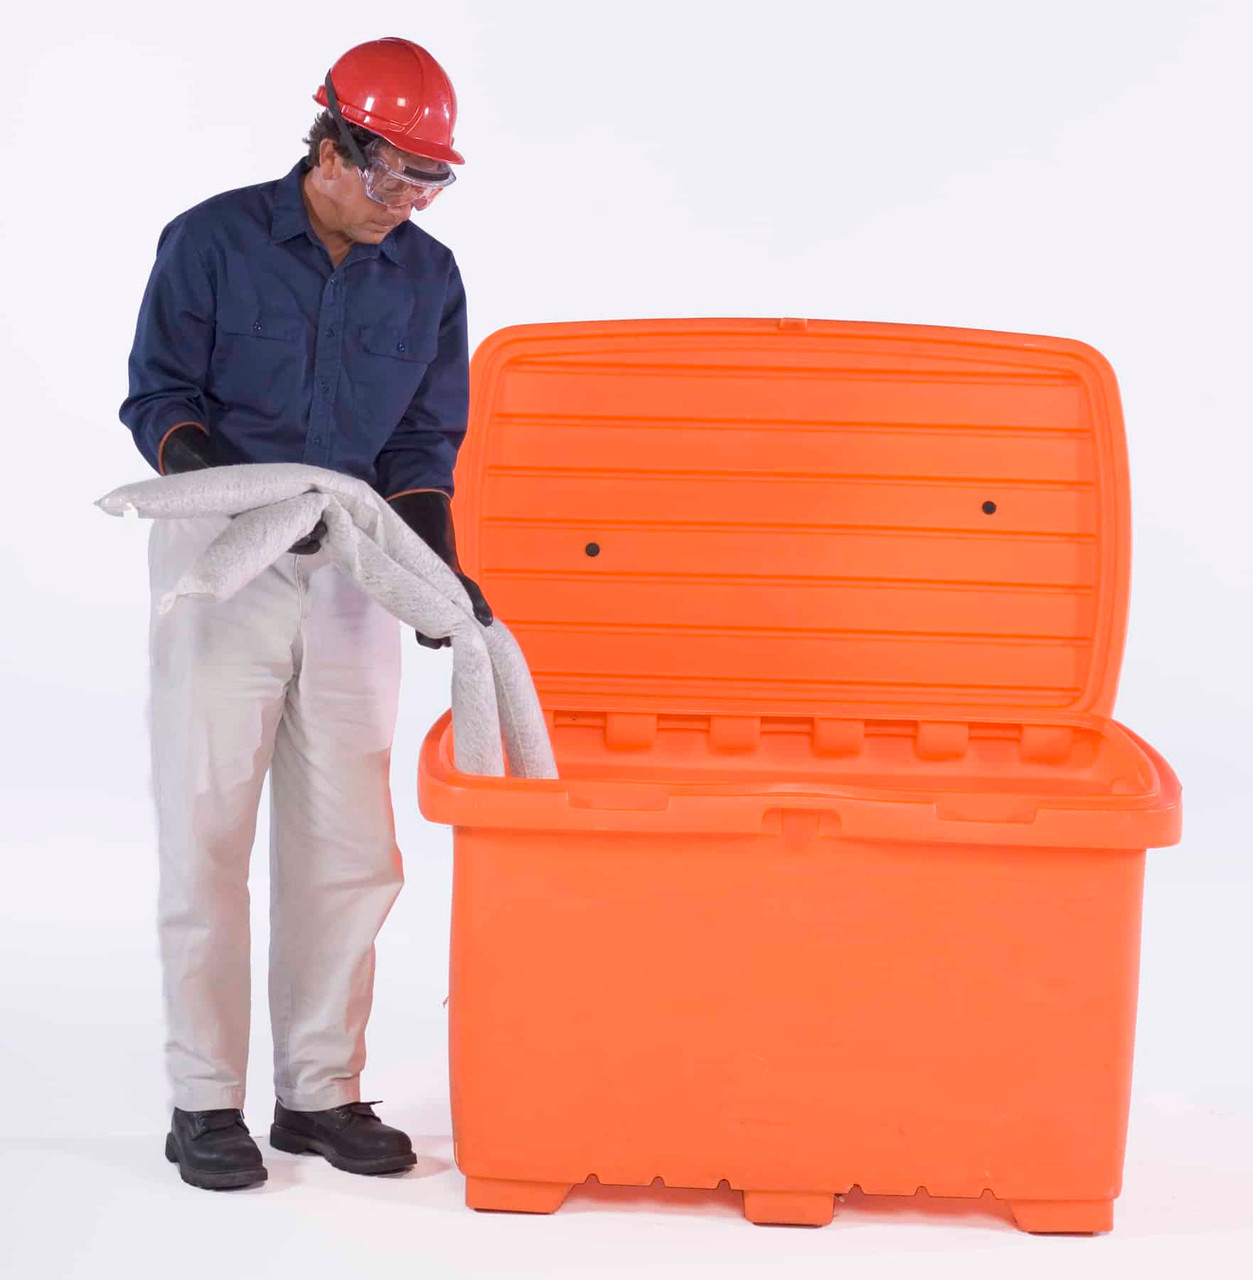 UltraTech 0867 Utility Box, 15 Cubic Foot Capacity, 8 Pneumatic Wheels, Safety Orange